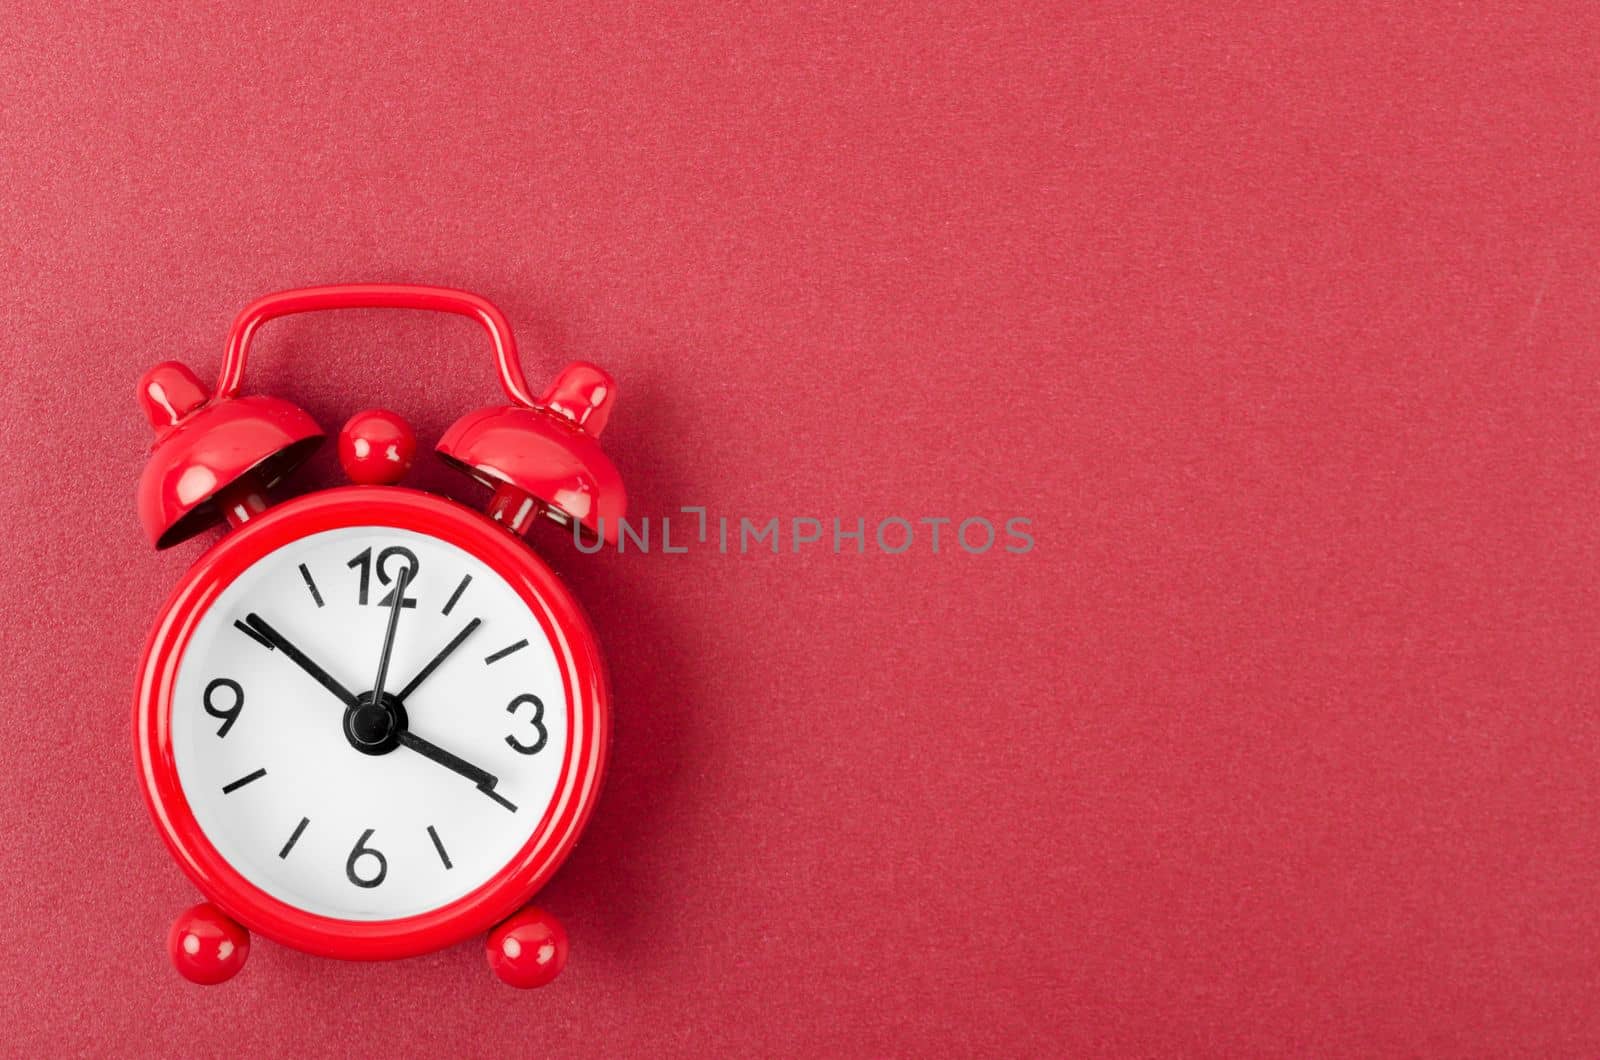 The Red alarm clock on red colour background. by Gamjai